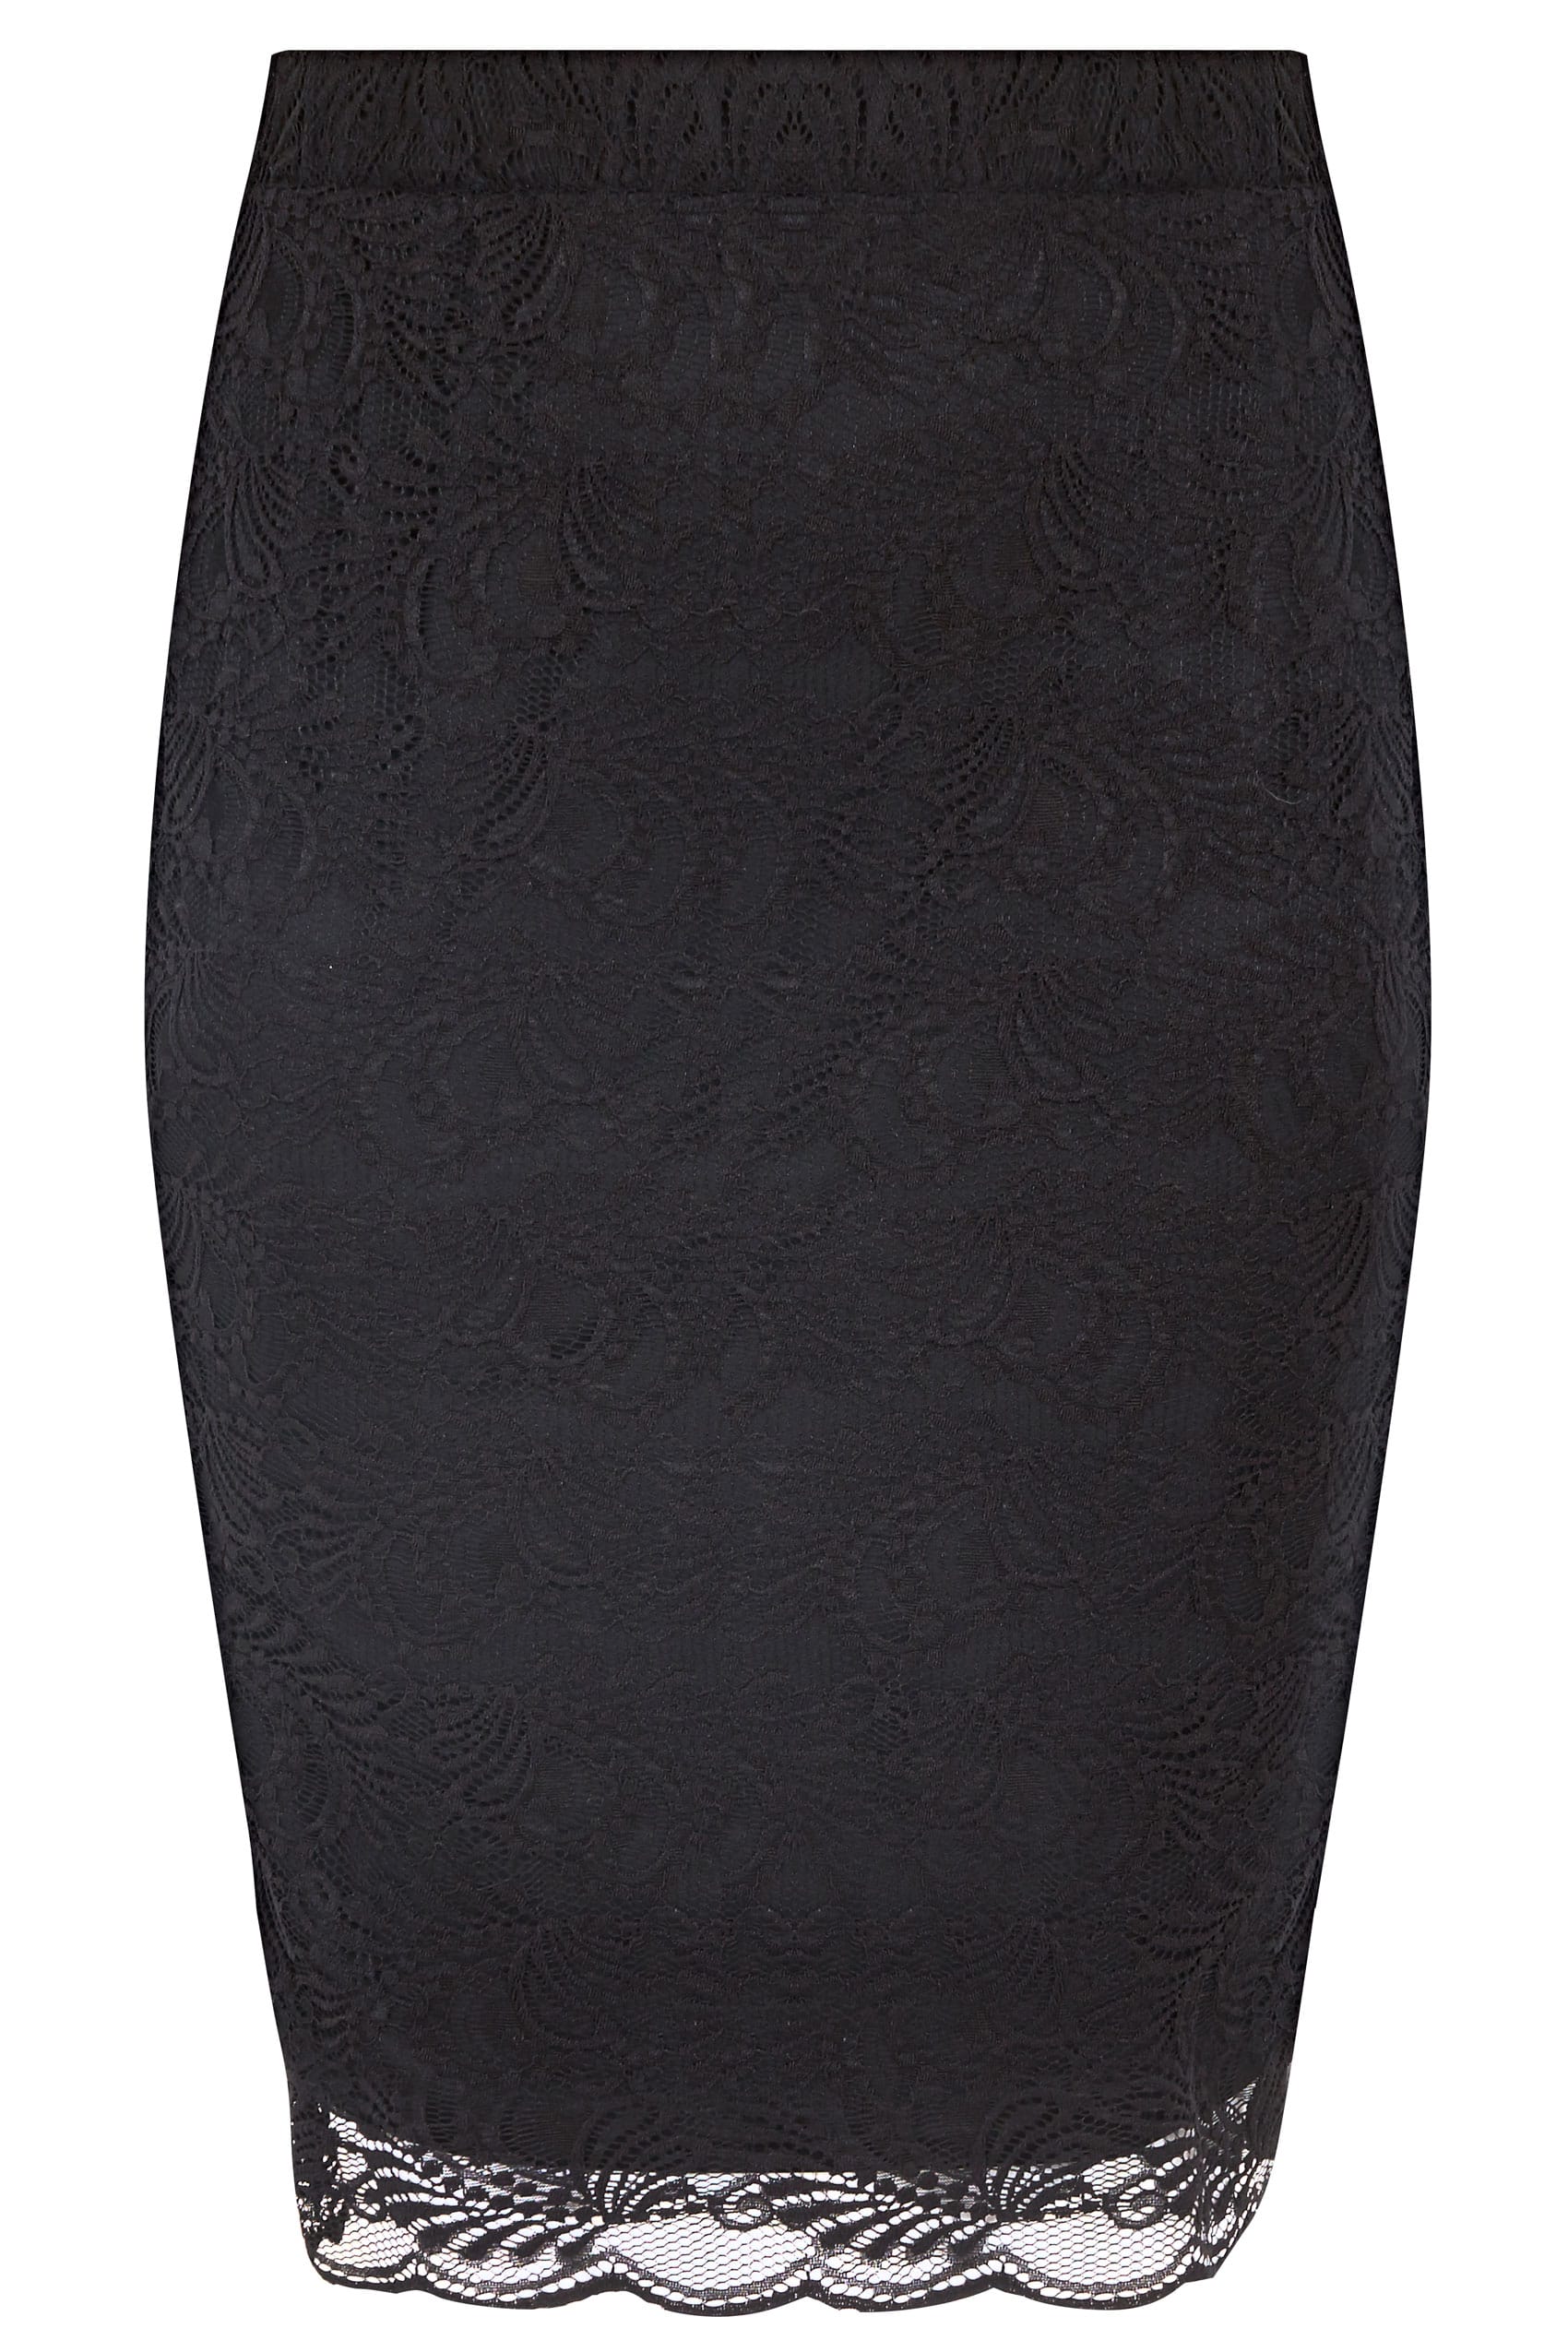 YOURS LONDON Black Lace Pencil Skirt With Scalloped Hem, plus size 16 ...